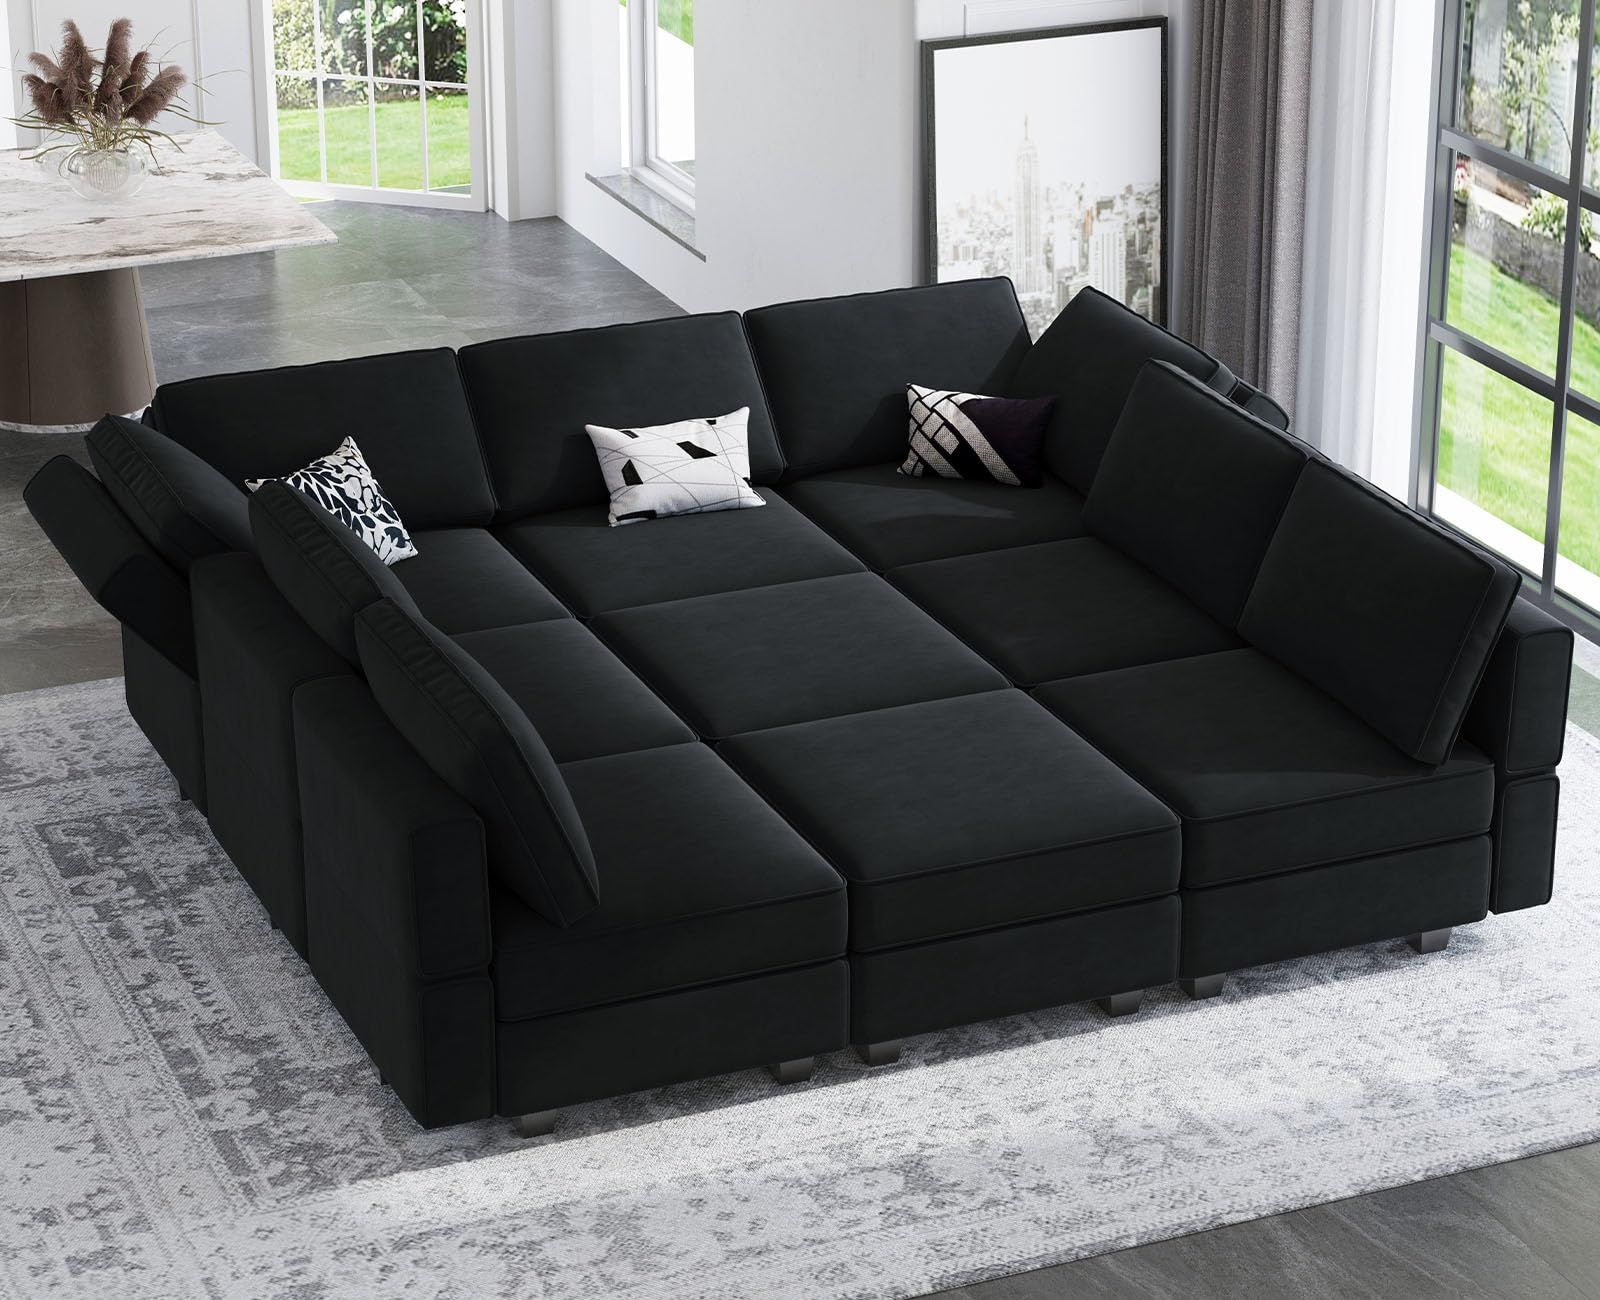 Save space and money with modular  sectional sleeper sofa